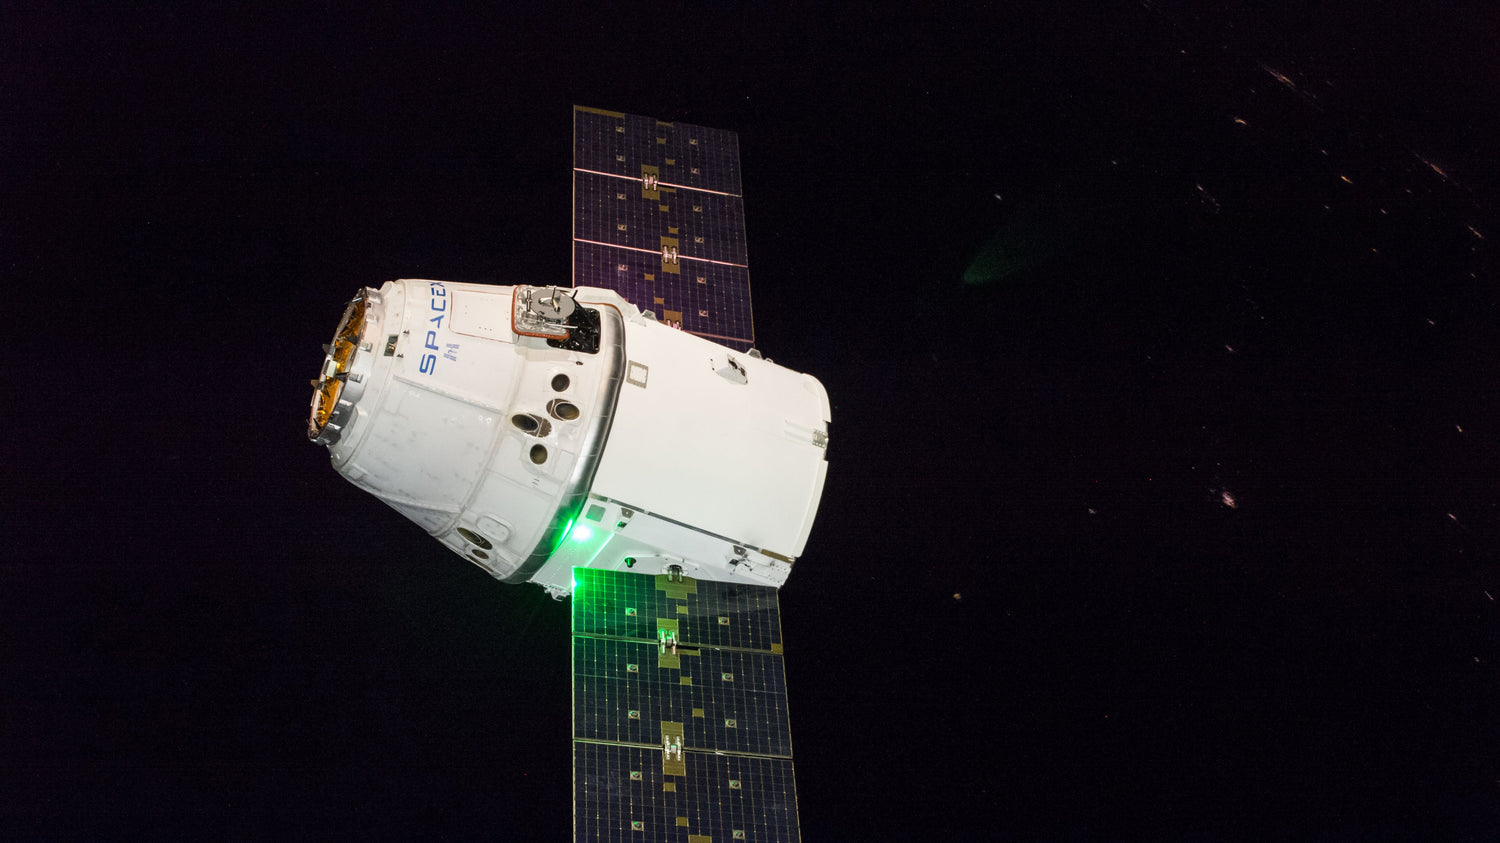 SpaceX's Dragon spacecraft will arrive to the International Space Station on Monday -Watch It Live!